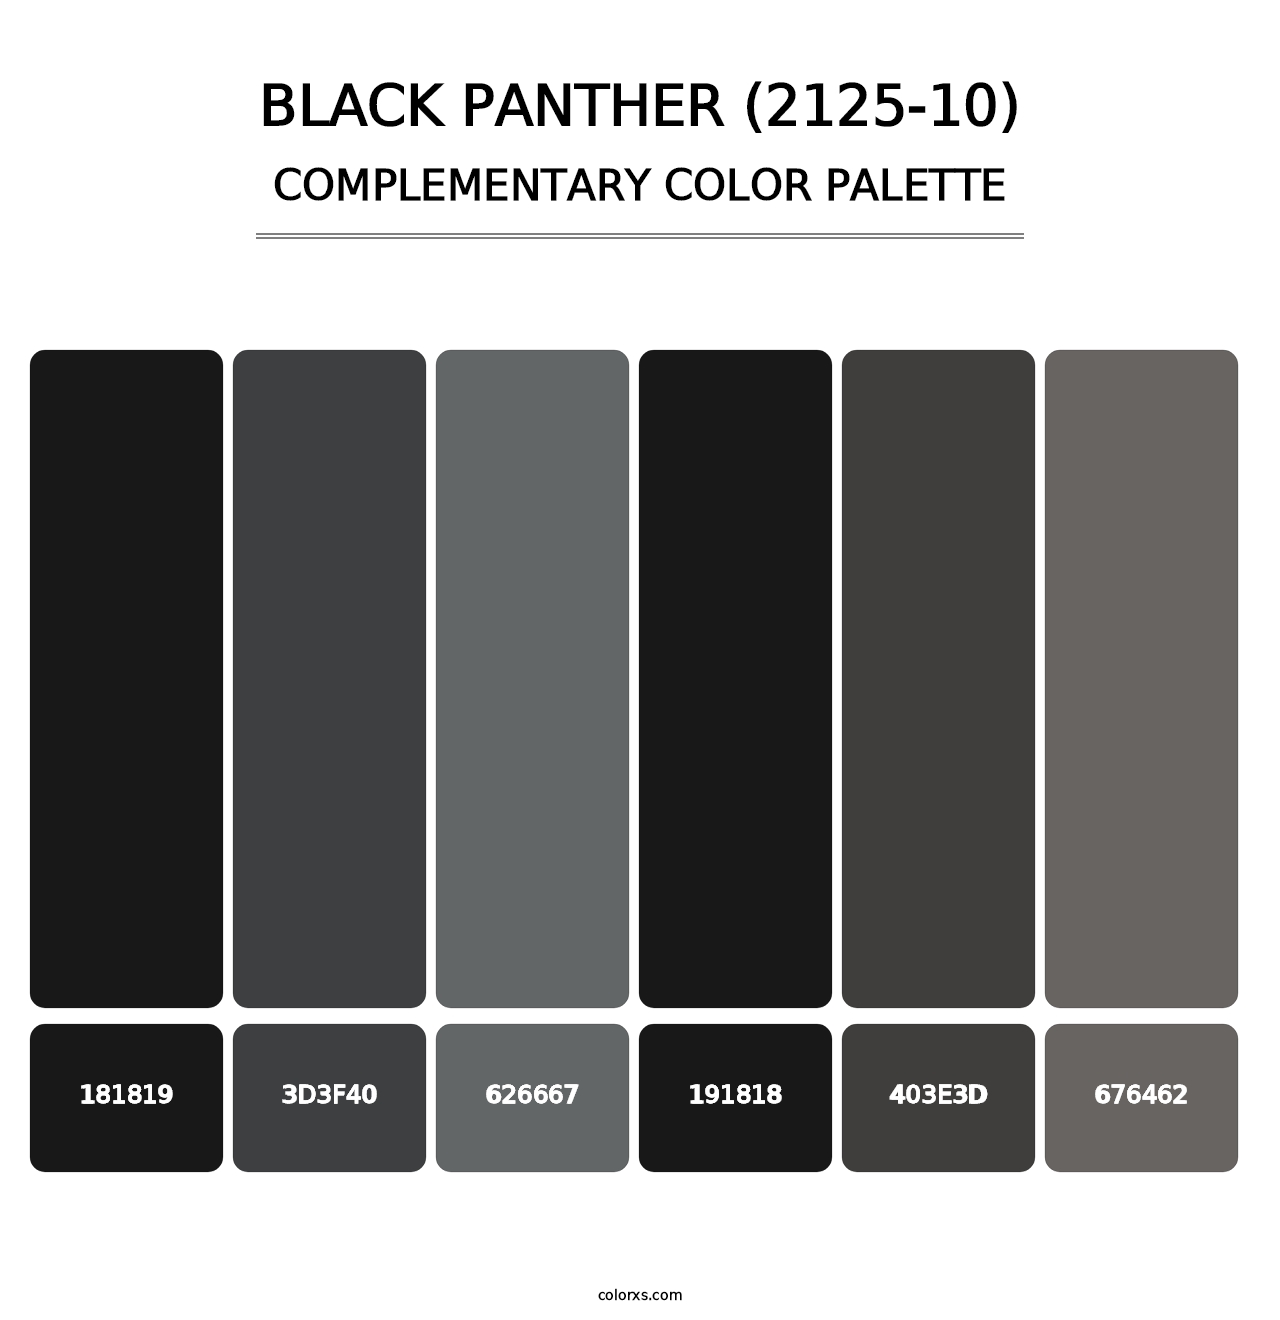 Black Panther (2125-10) - Complementary Color Palette